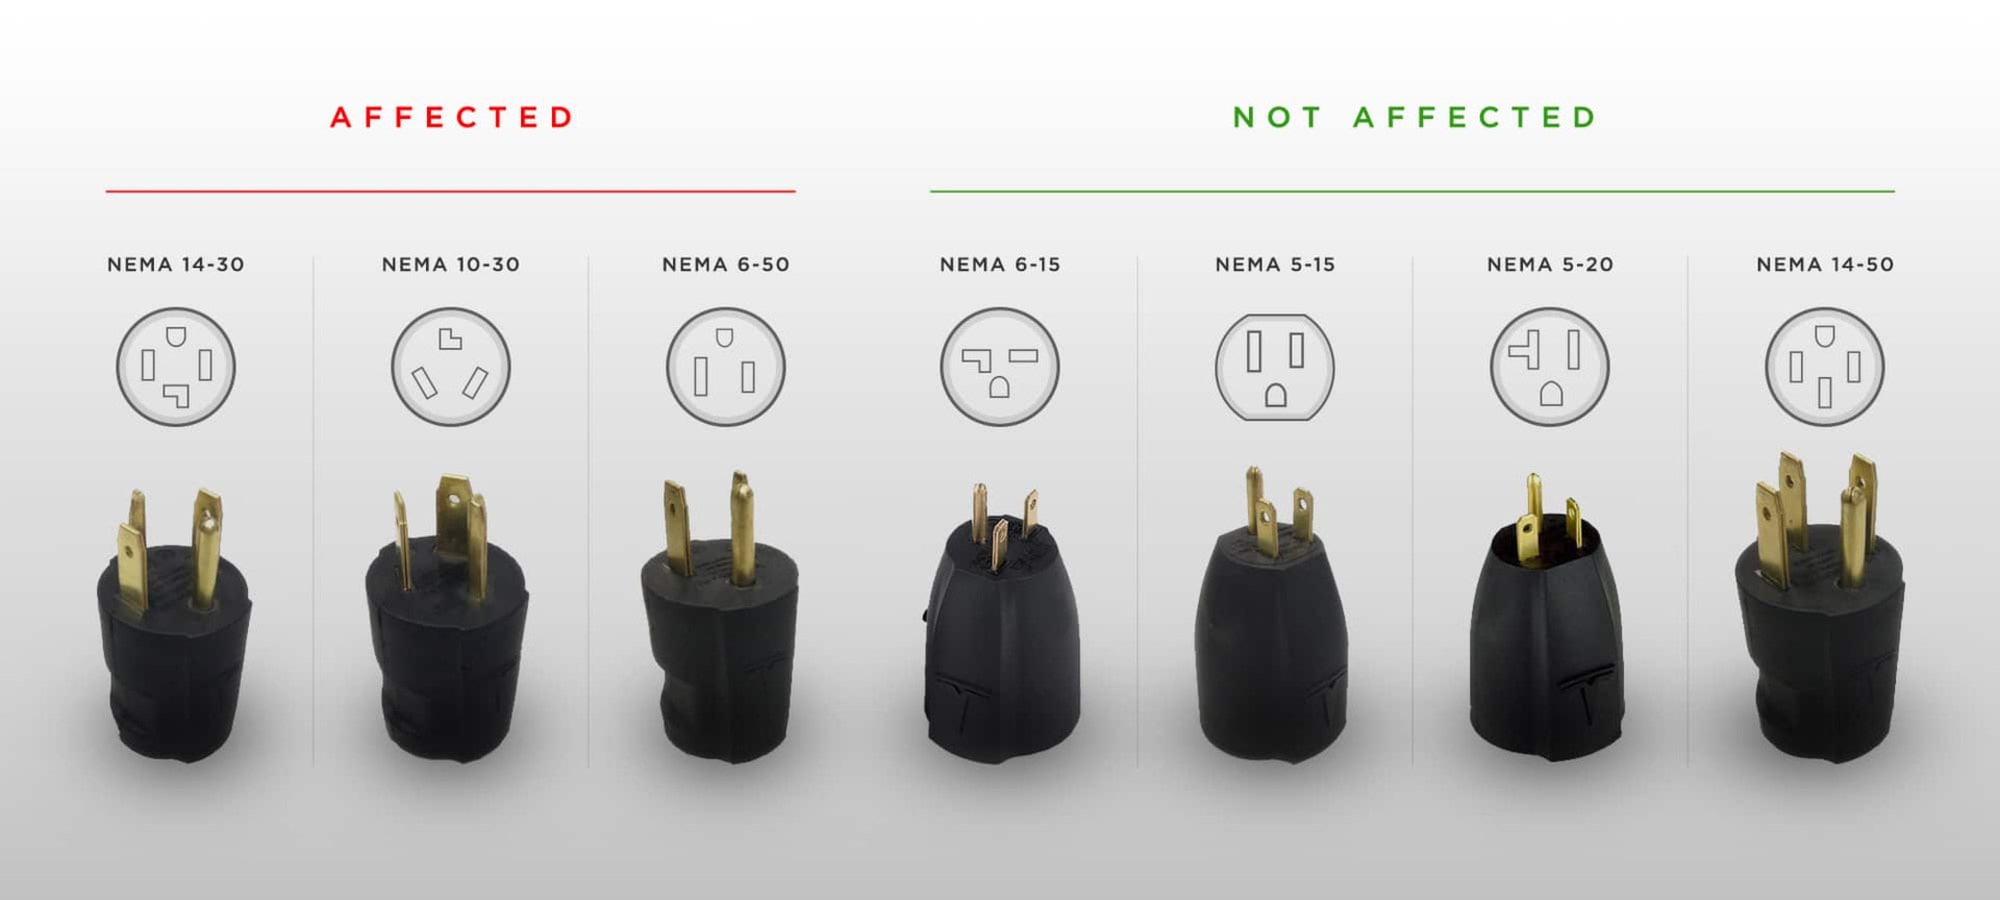 Affected and not affected adaptors